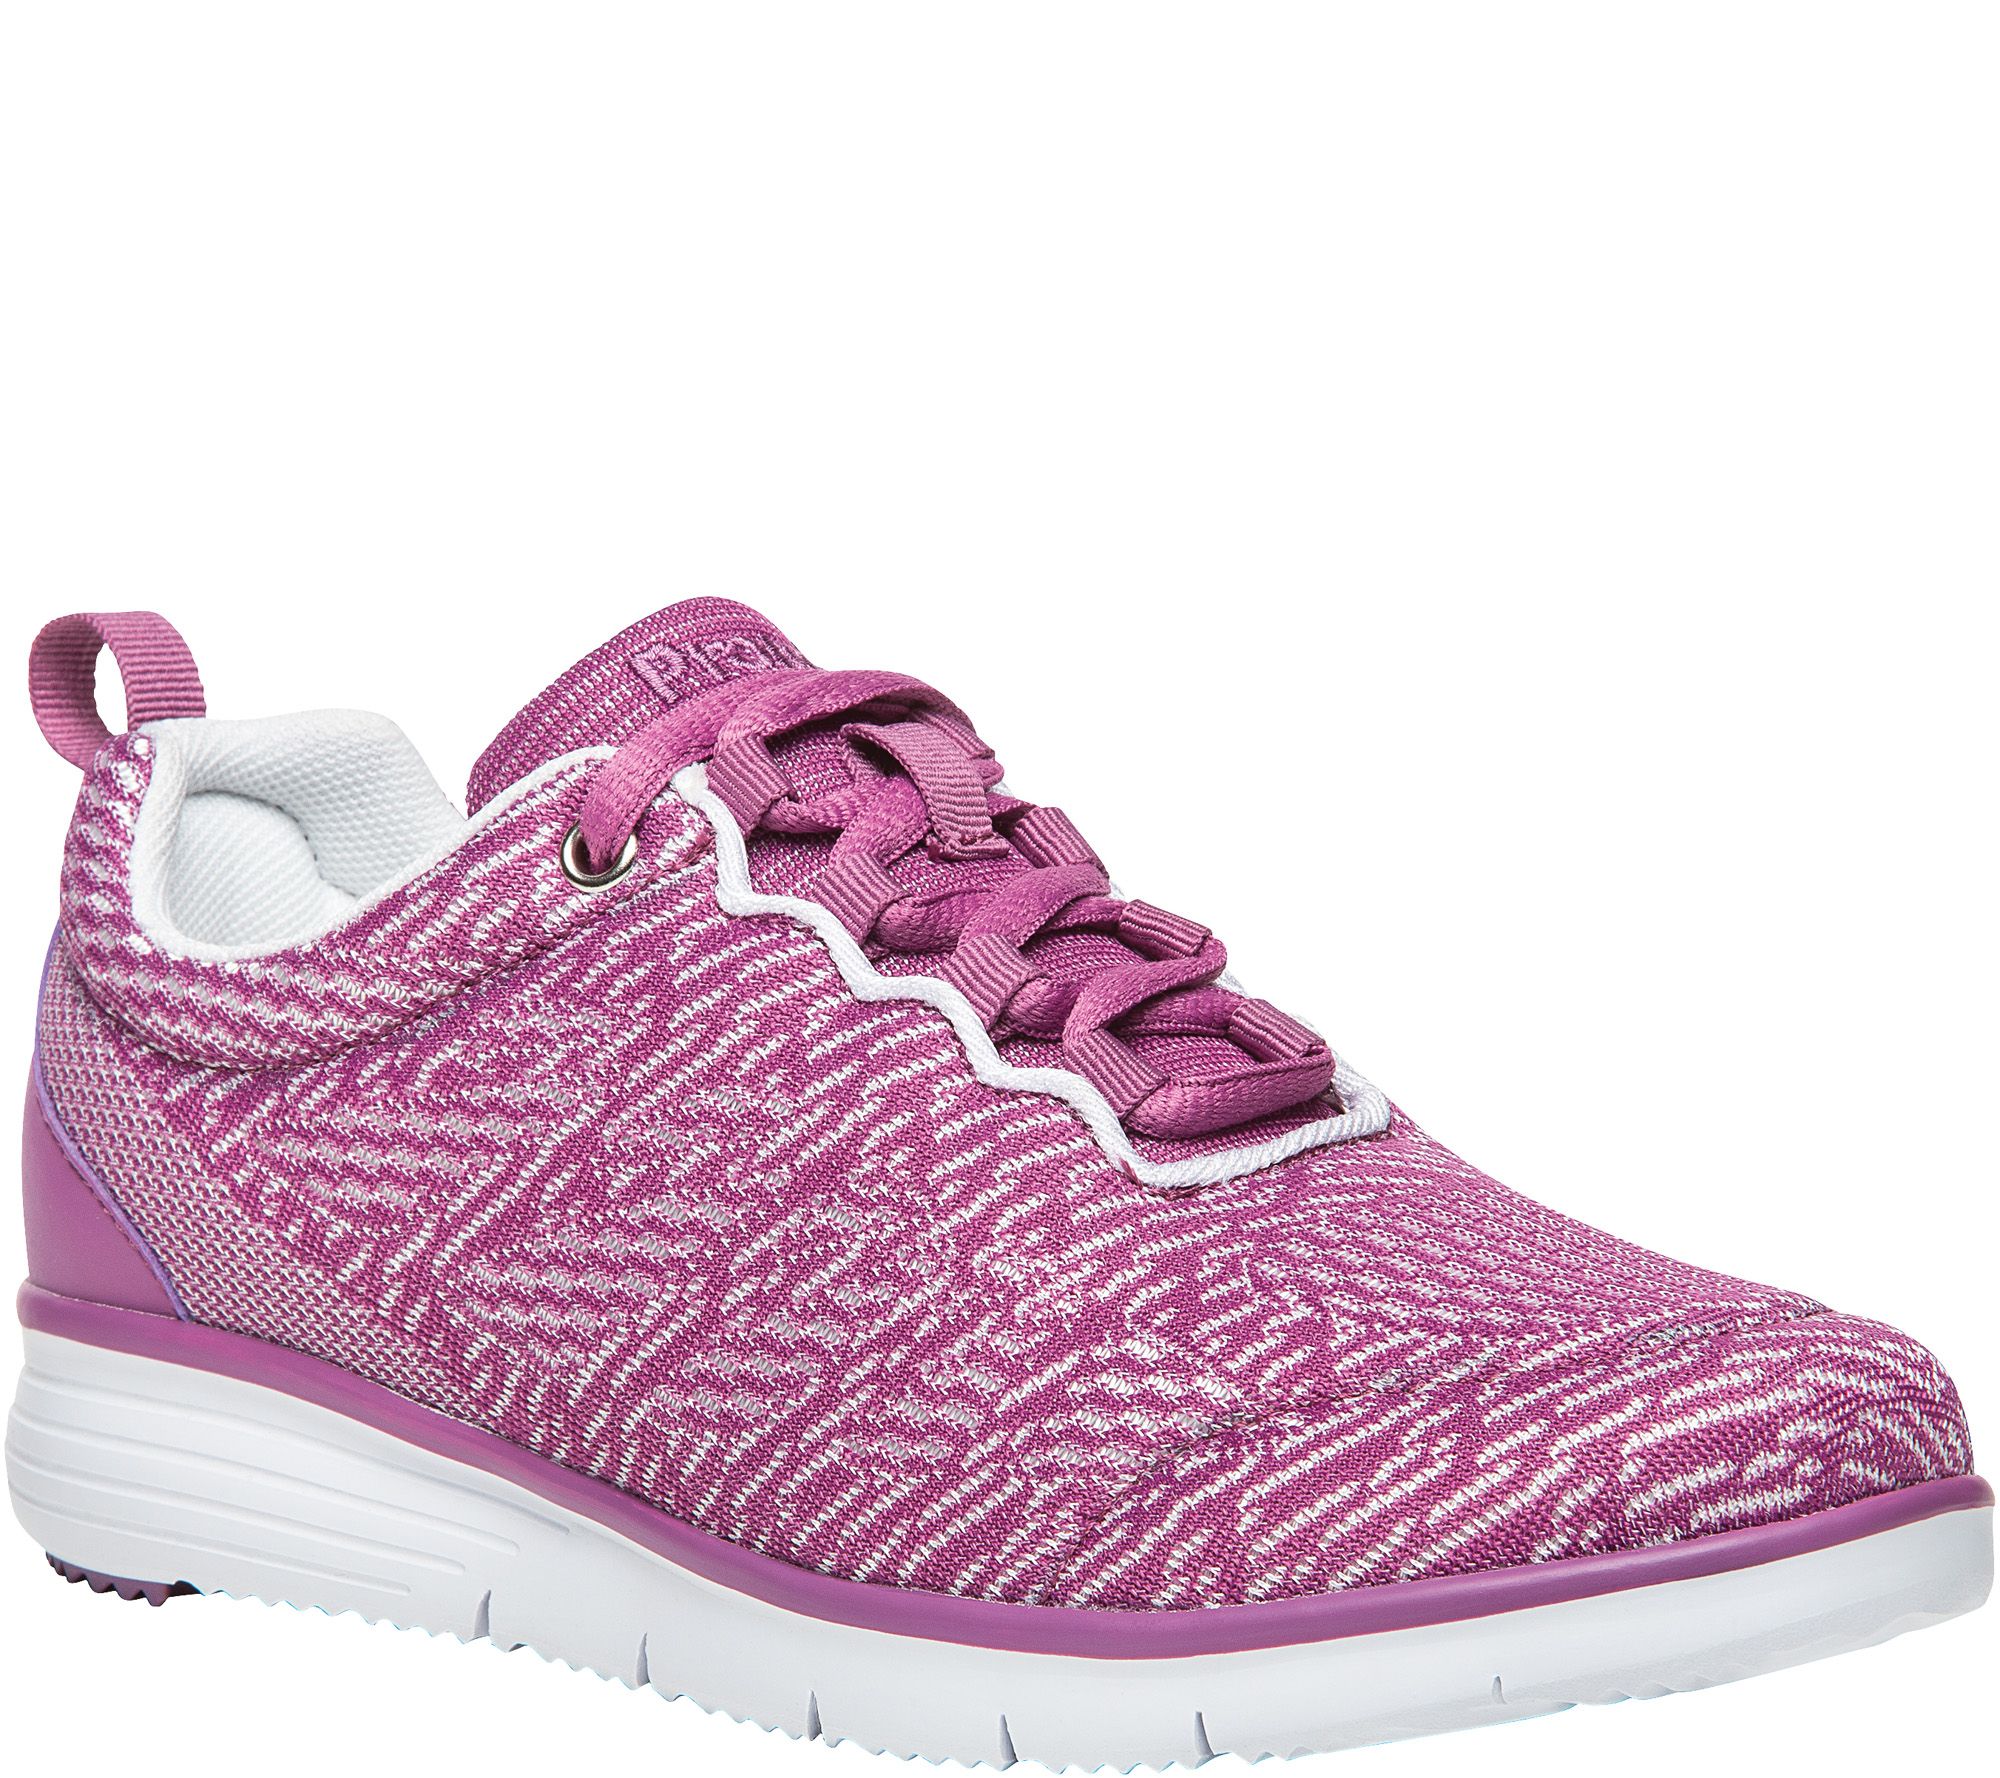 Sneakers & Athletic - Women's Sneakers & Athletic Shoes — QVC.com